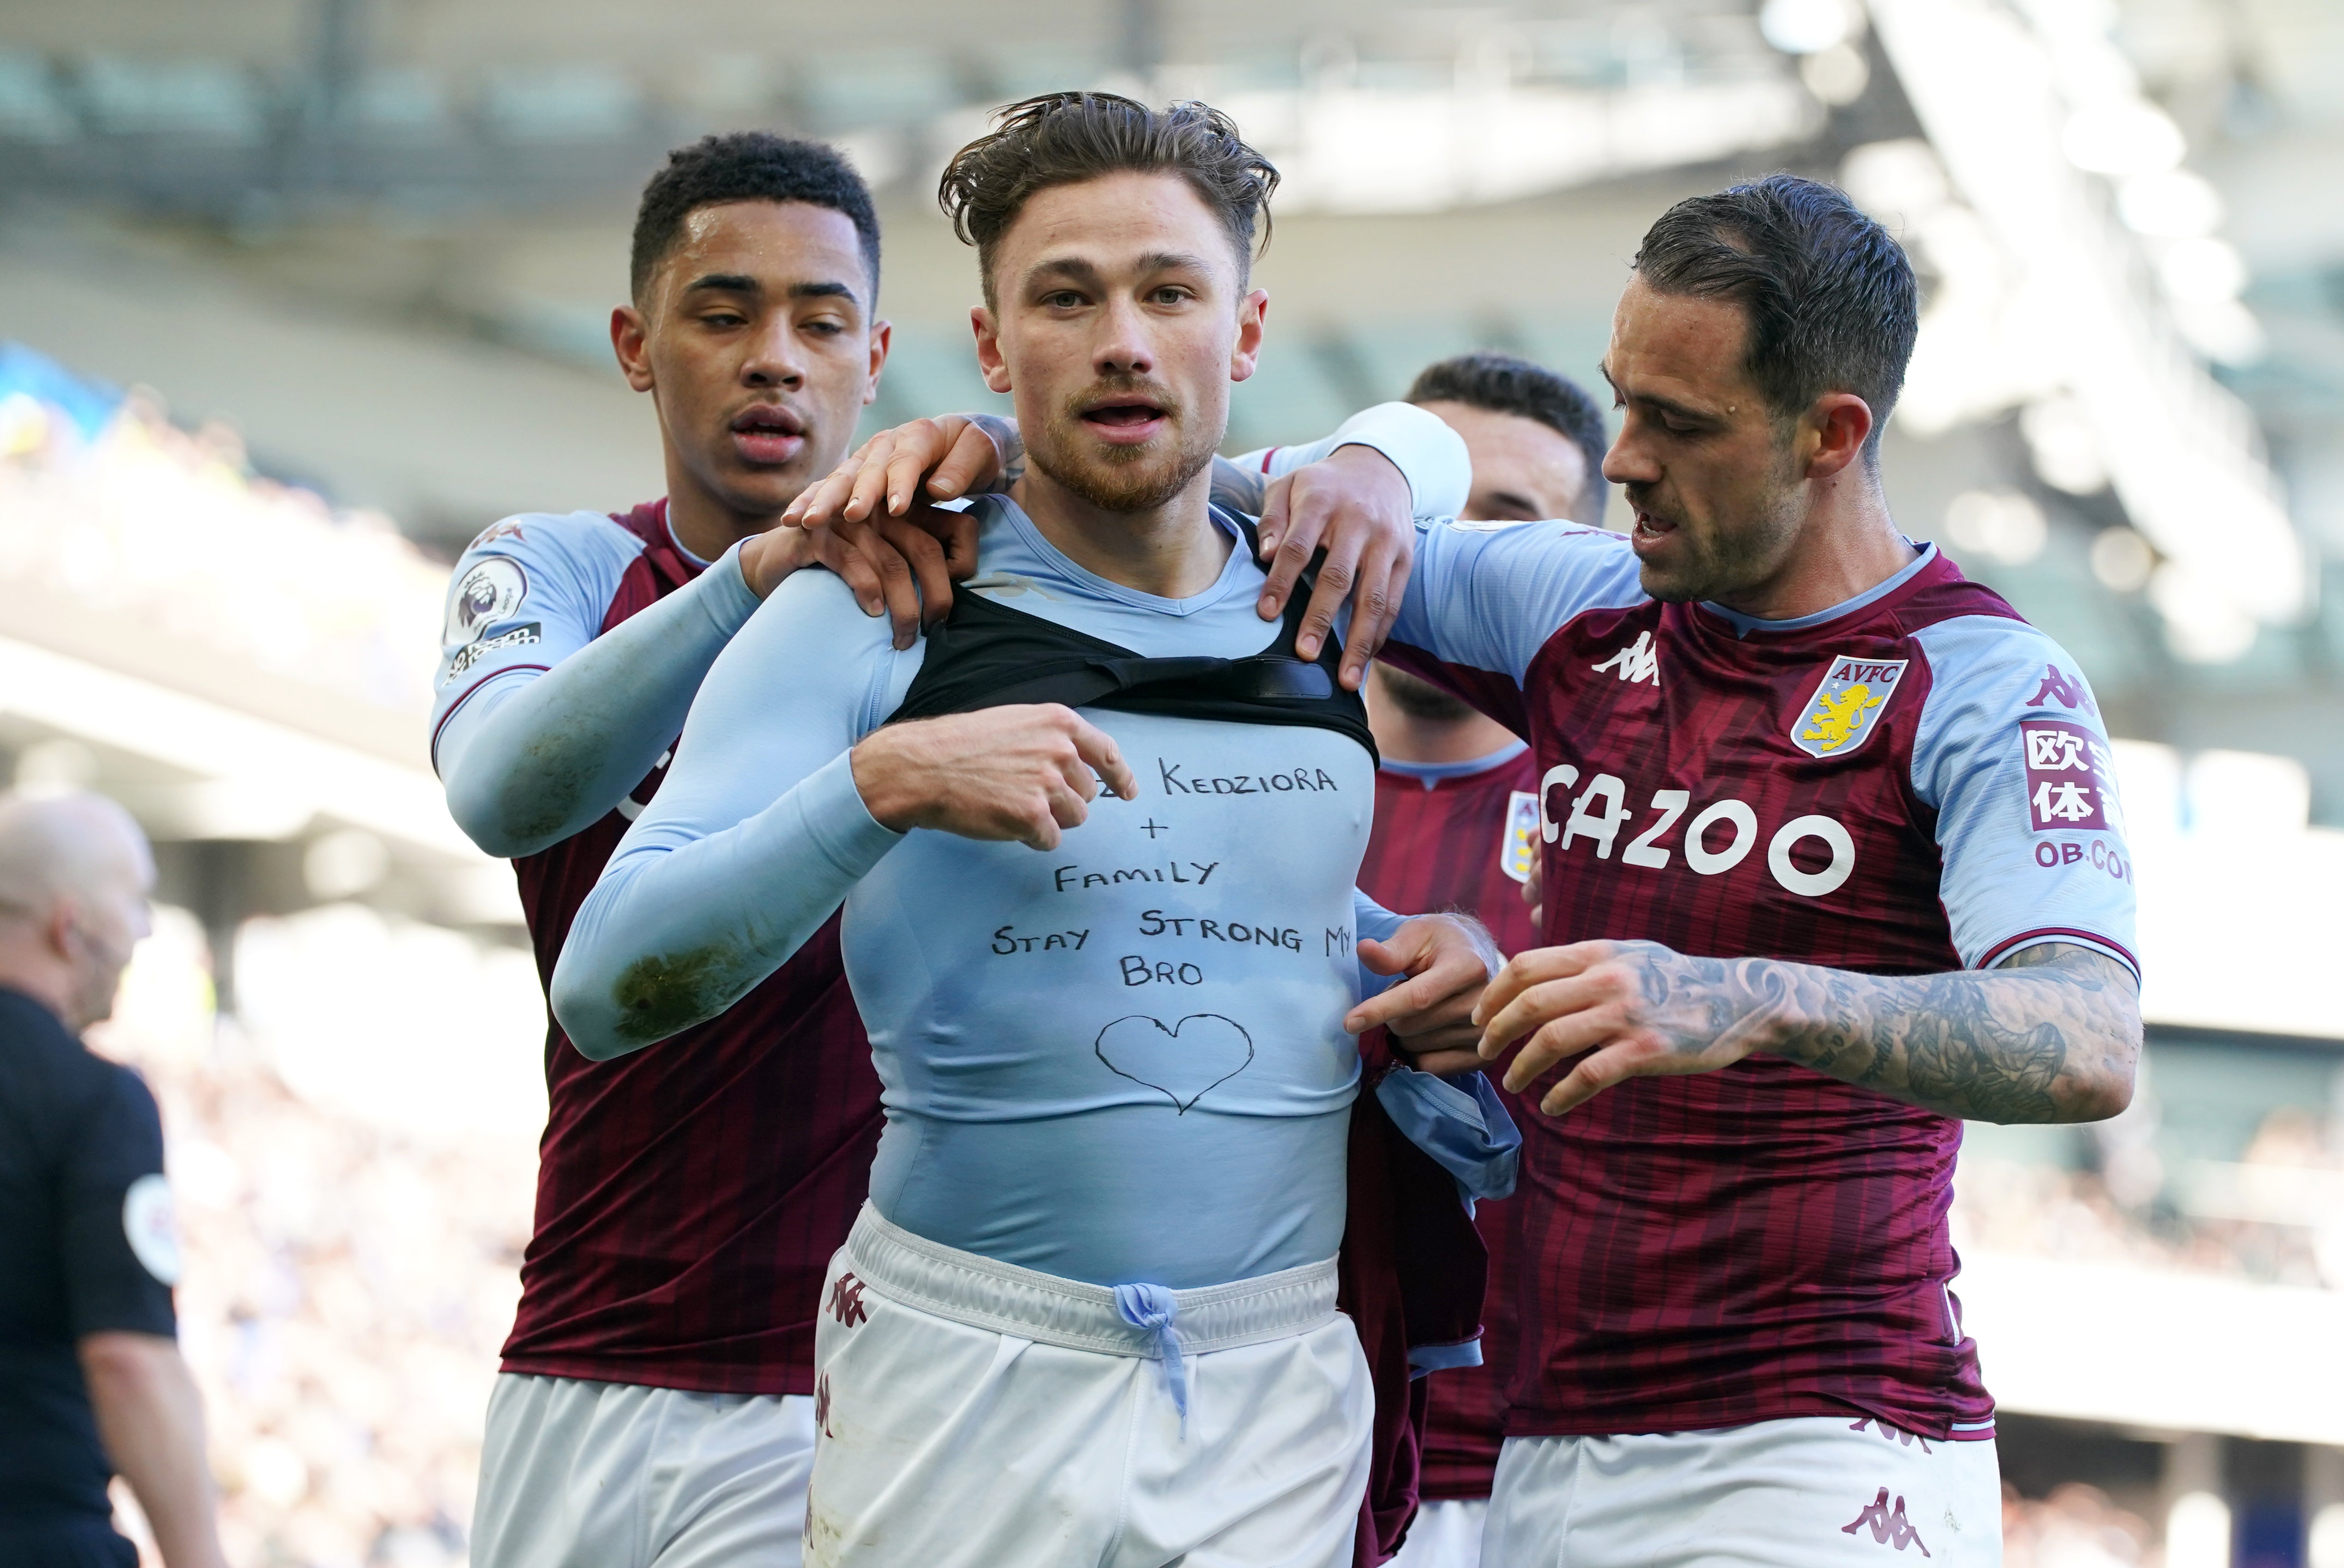 Aston Villa’s Matty Cash paid tribute to his Poland team-mate after scoring the opener against Brighton